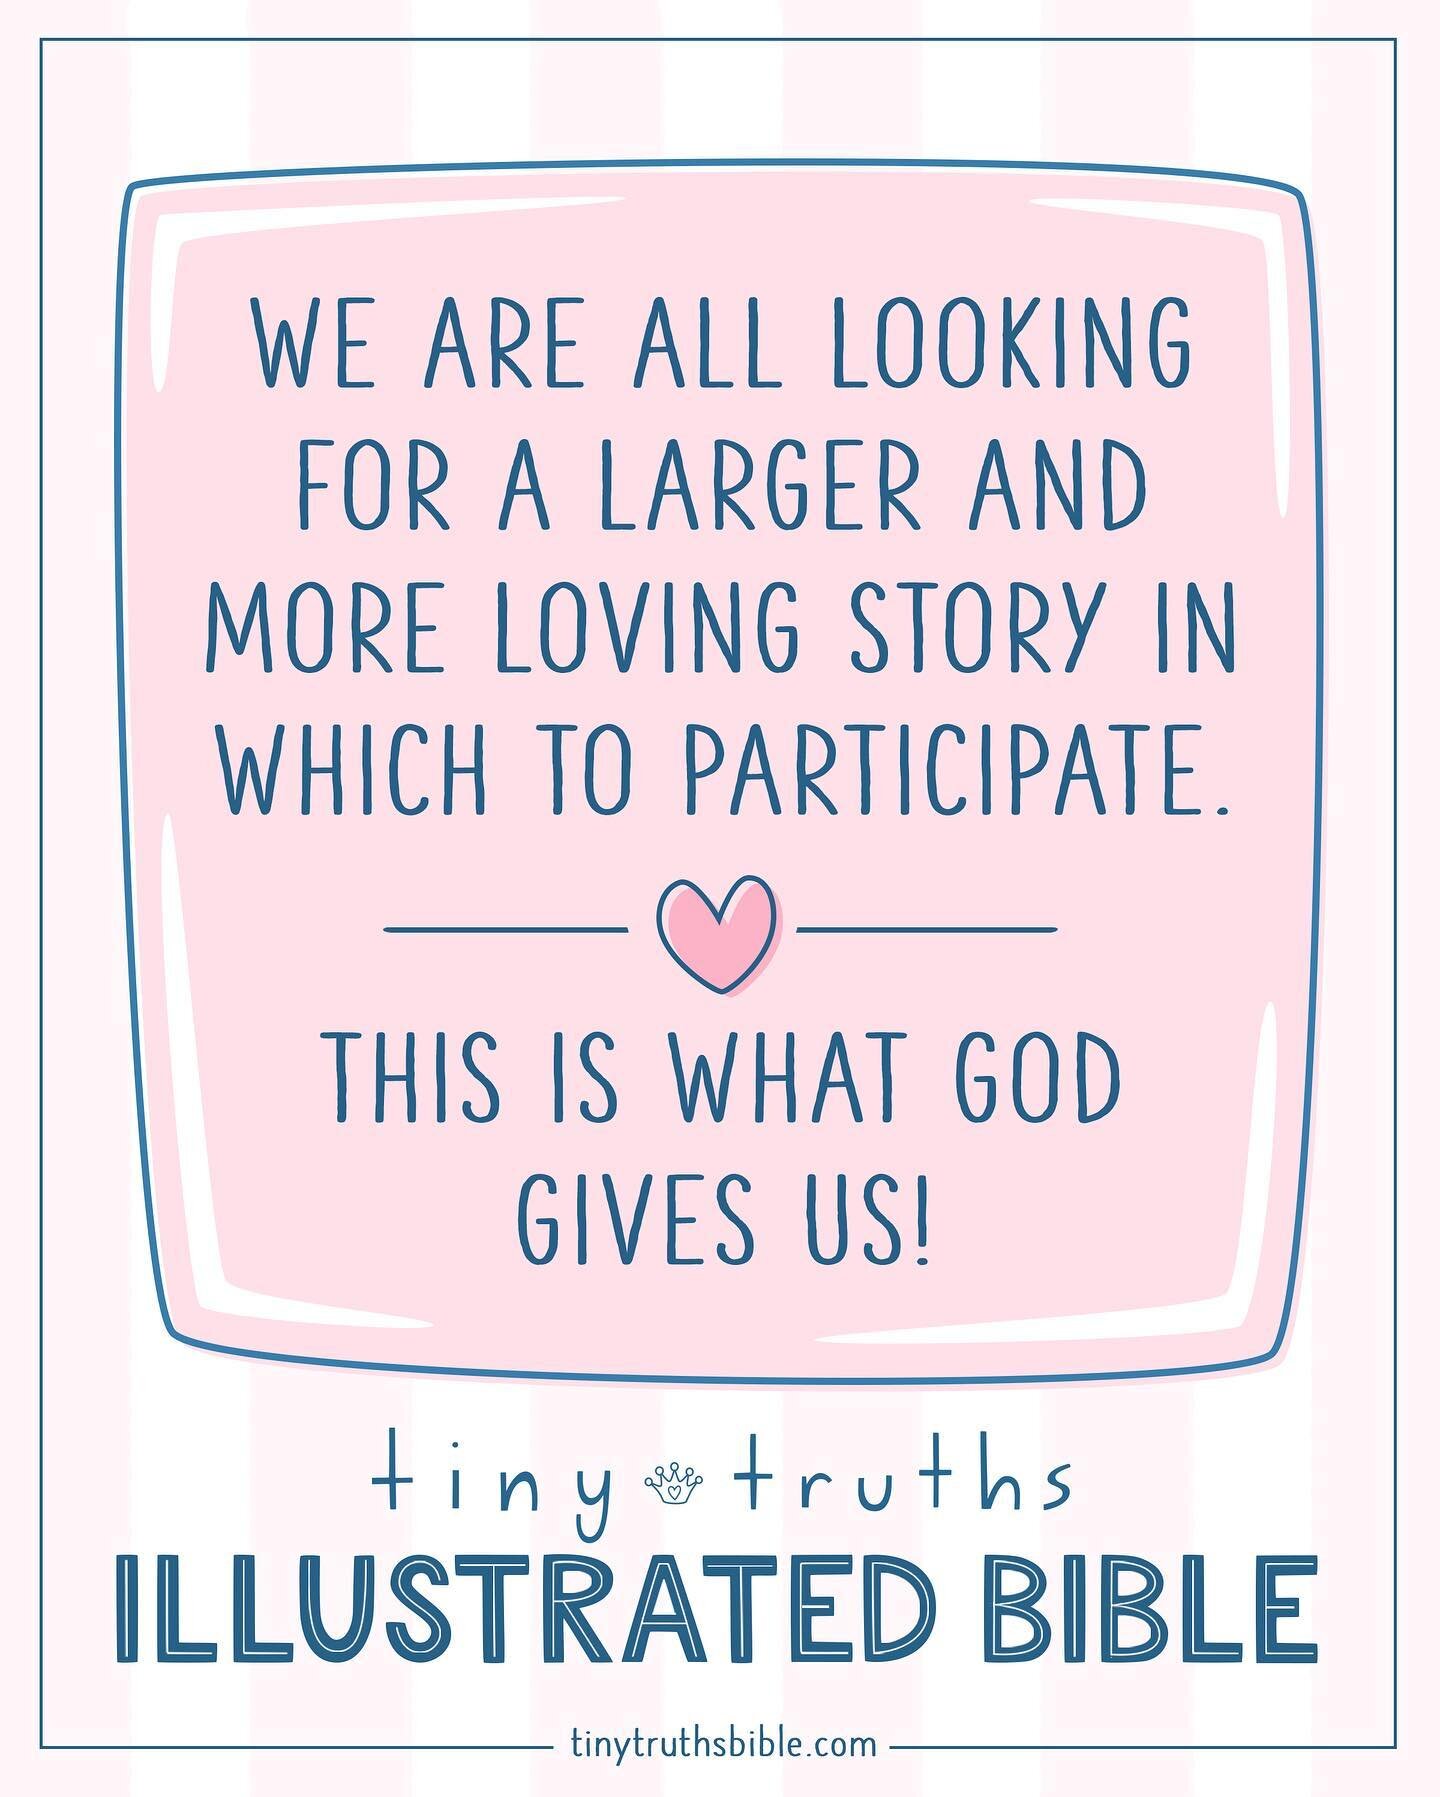 The Bible is ONE BIG story of God&rsquo;s great  love for everything he has created!

It&rsquo;s a story that isn&rsquo;t finished!

And it&rsquo;s your story too! You have a role to play&hellip;and it matters!

We get to participate!

We have the lo